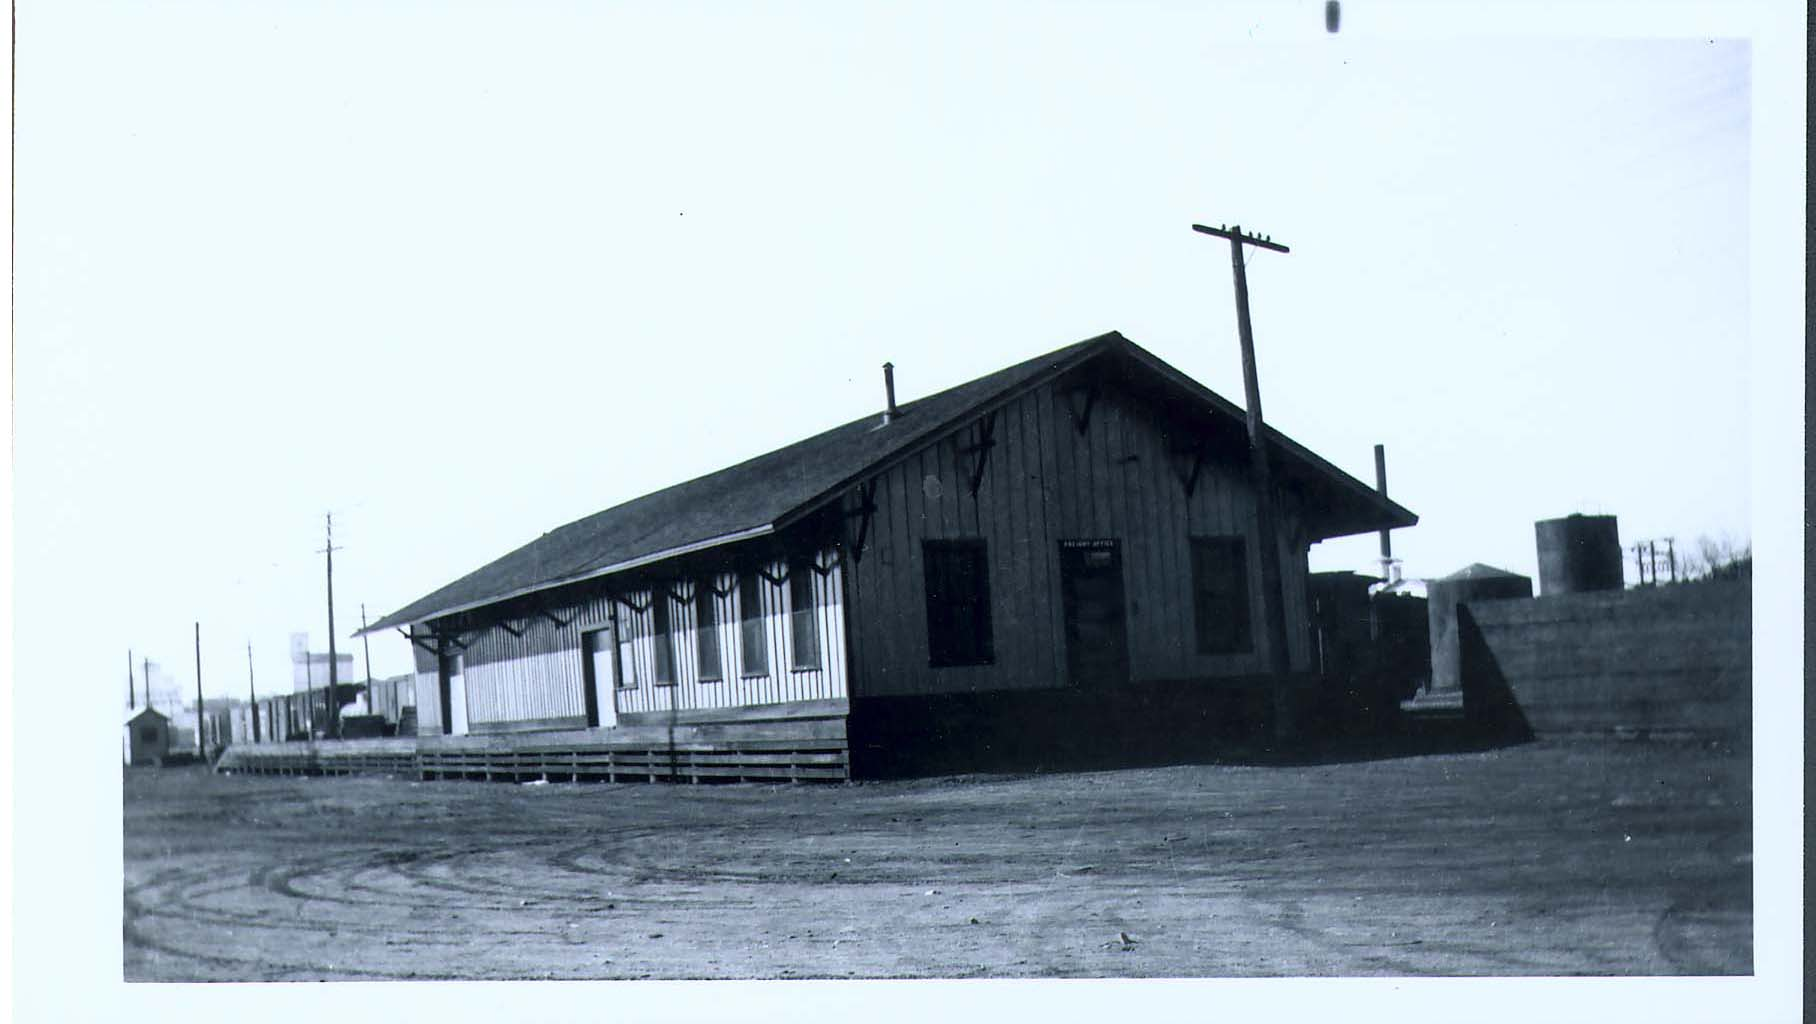 Image of T&P Stations & Structures in Denton TX Freight House 1937